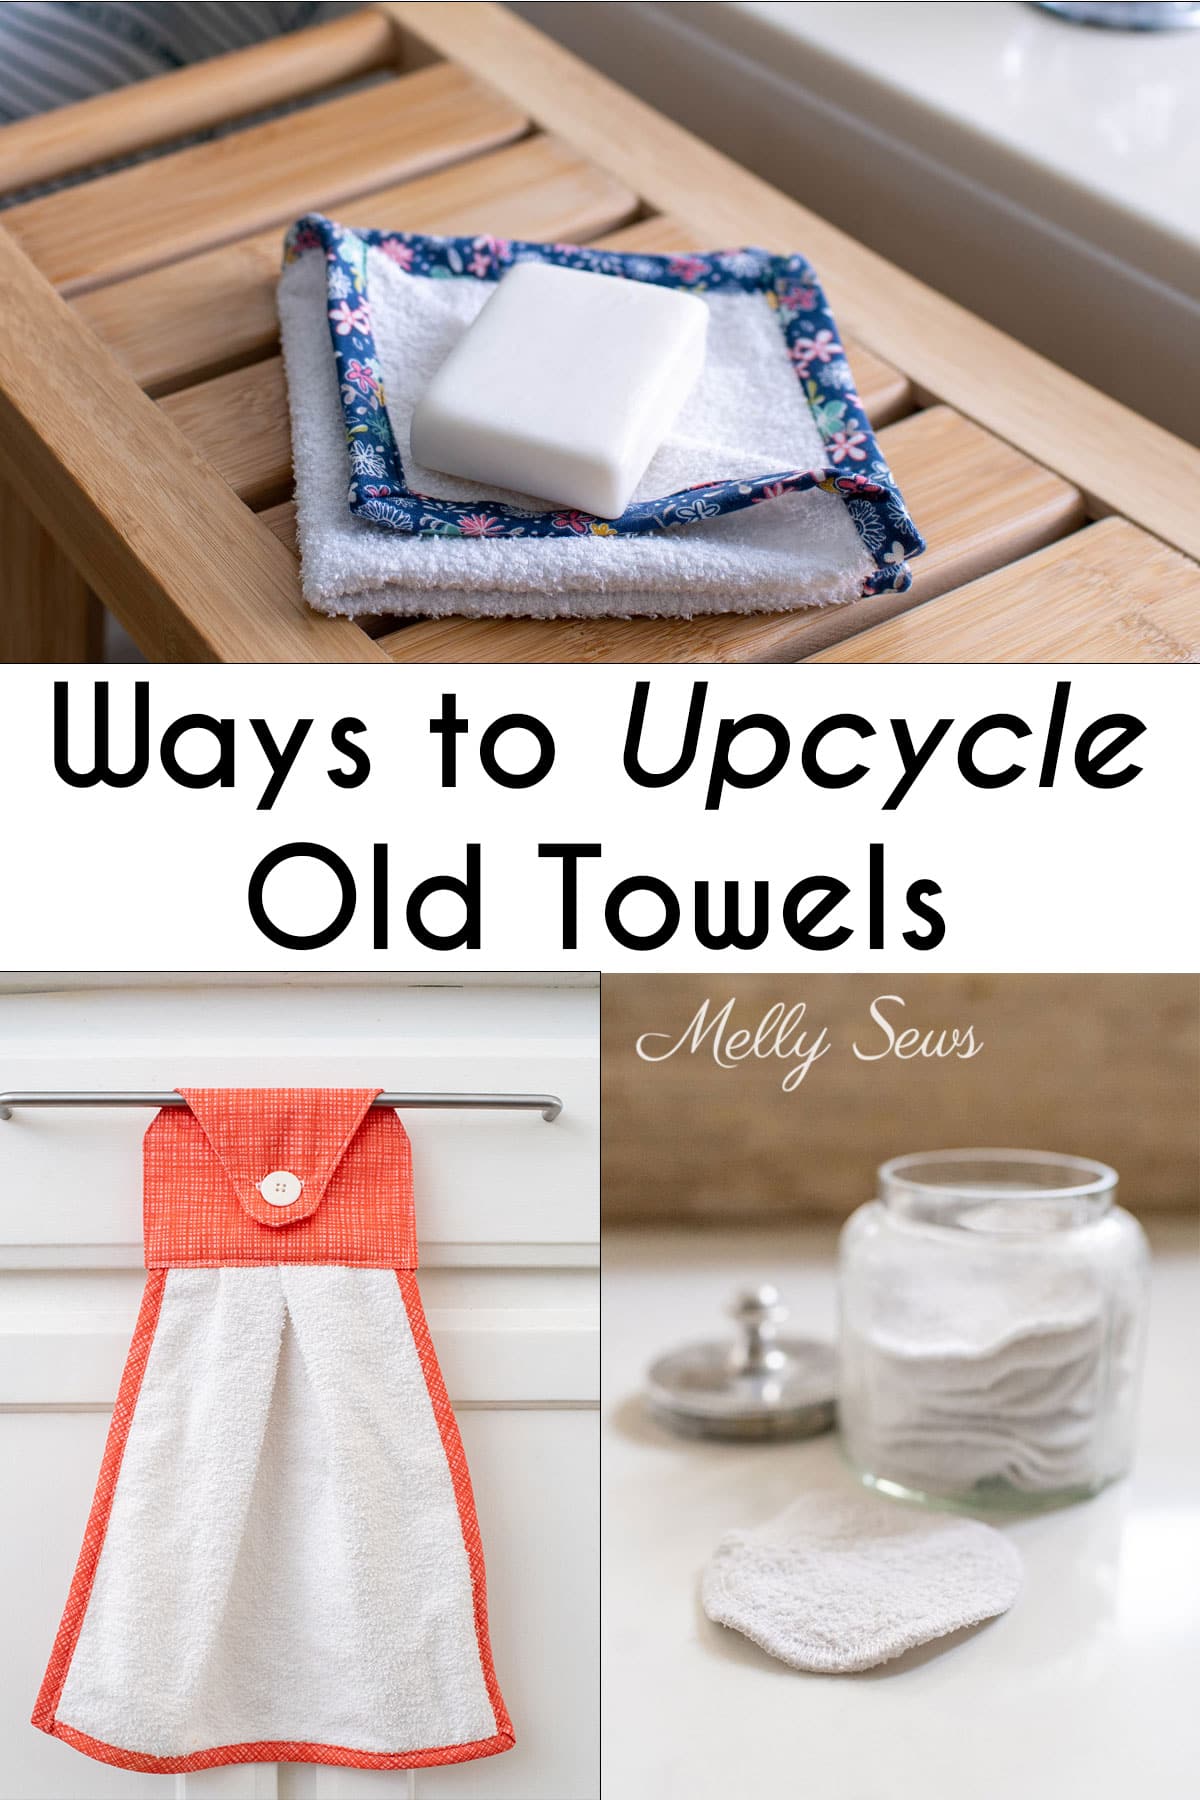 Make reusable dishcloths and kitchen towels for spring cleaning